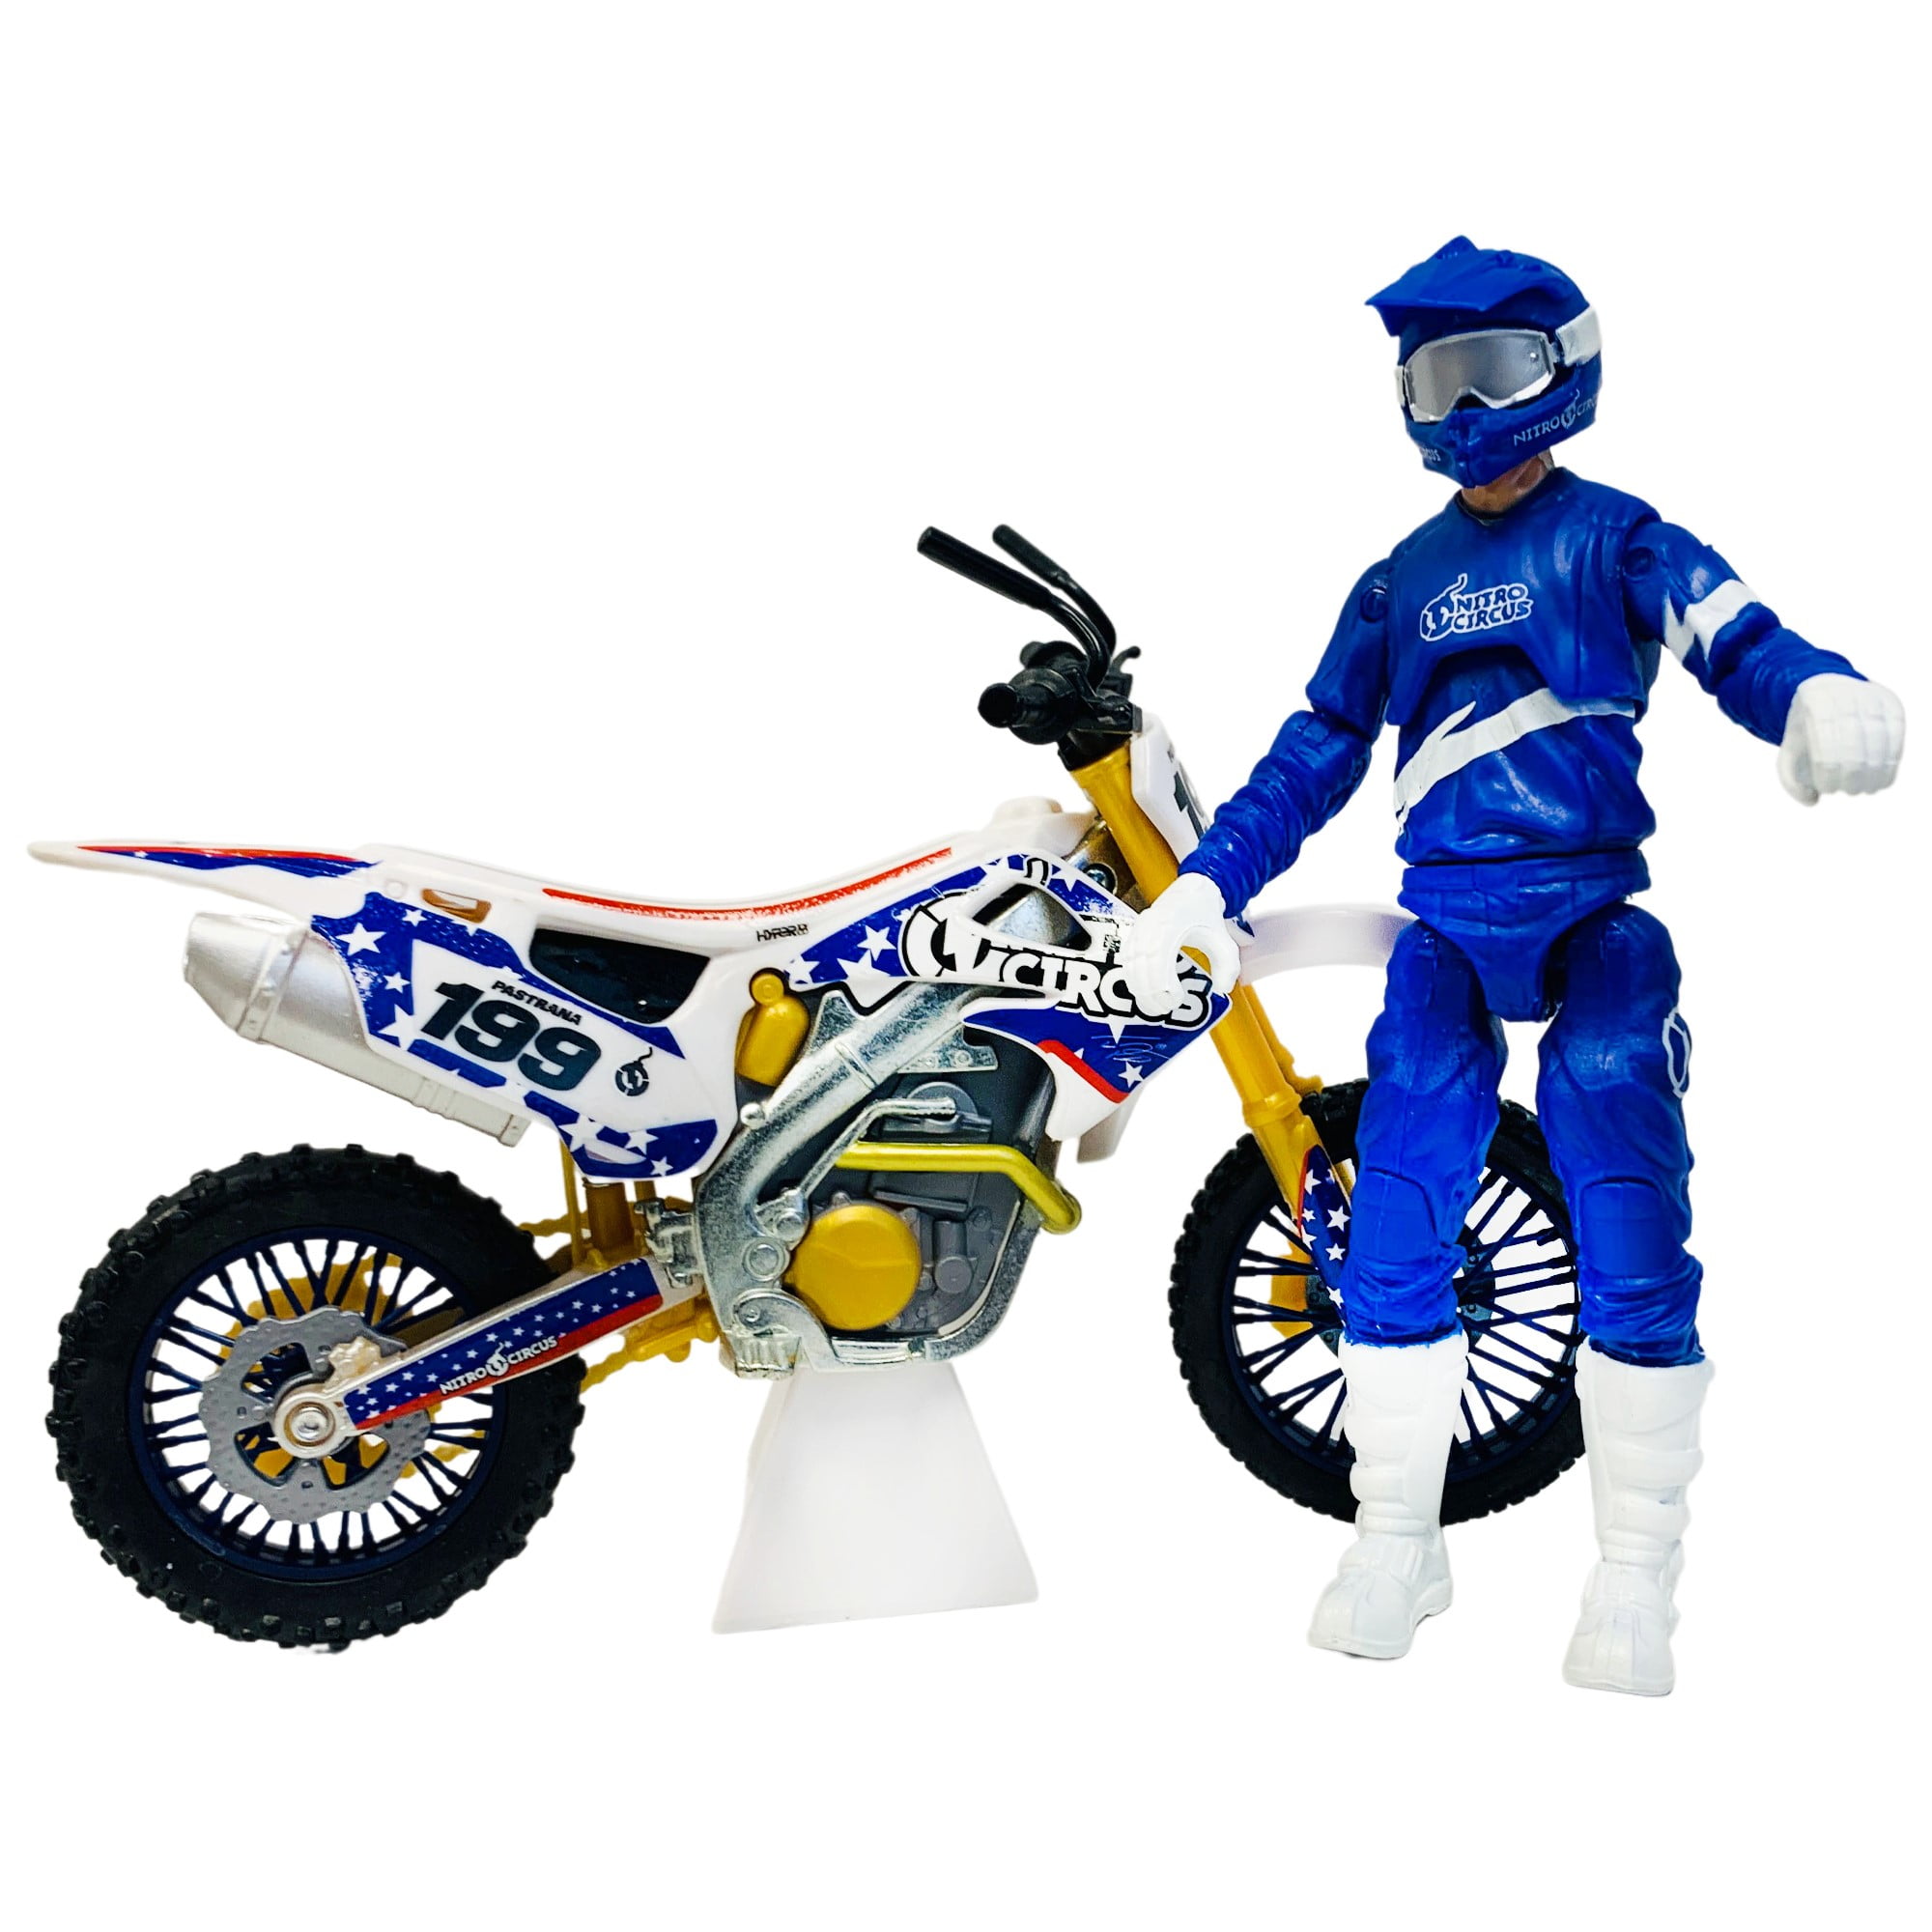 Adventure Force Nitro Circus Dirt Bike and Rider Toy, 112 Replica, Assorted Colors